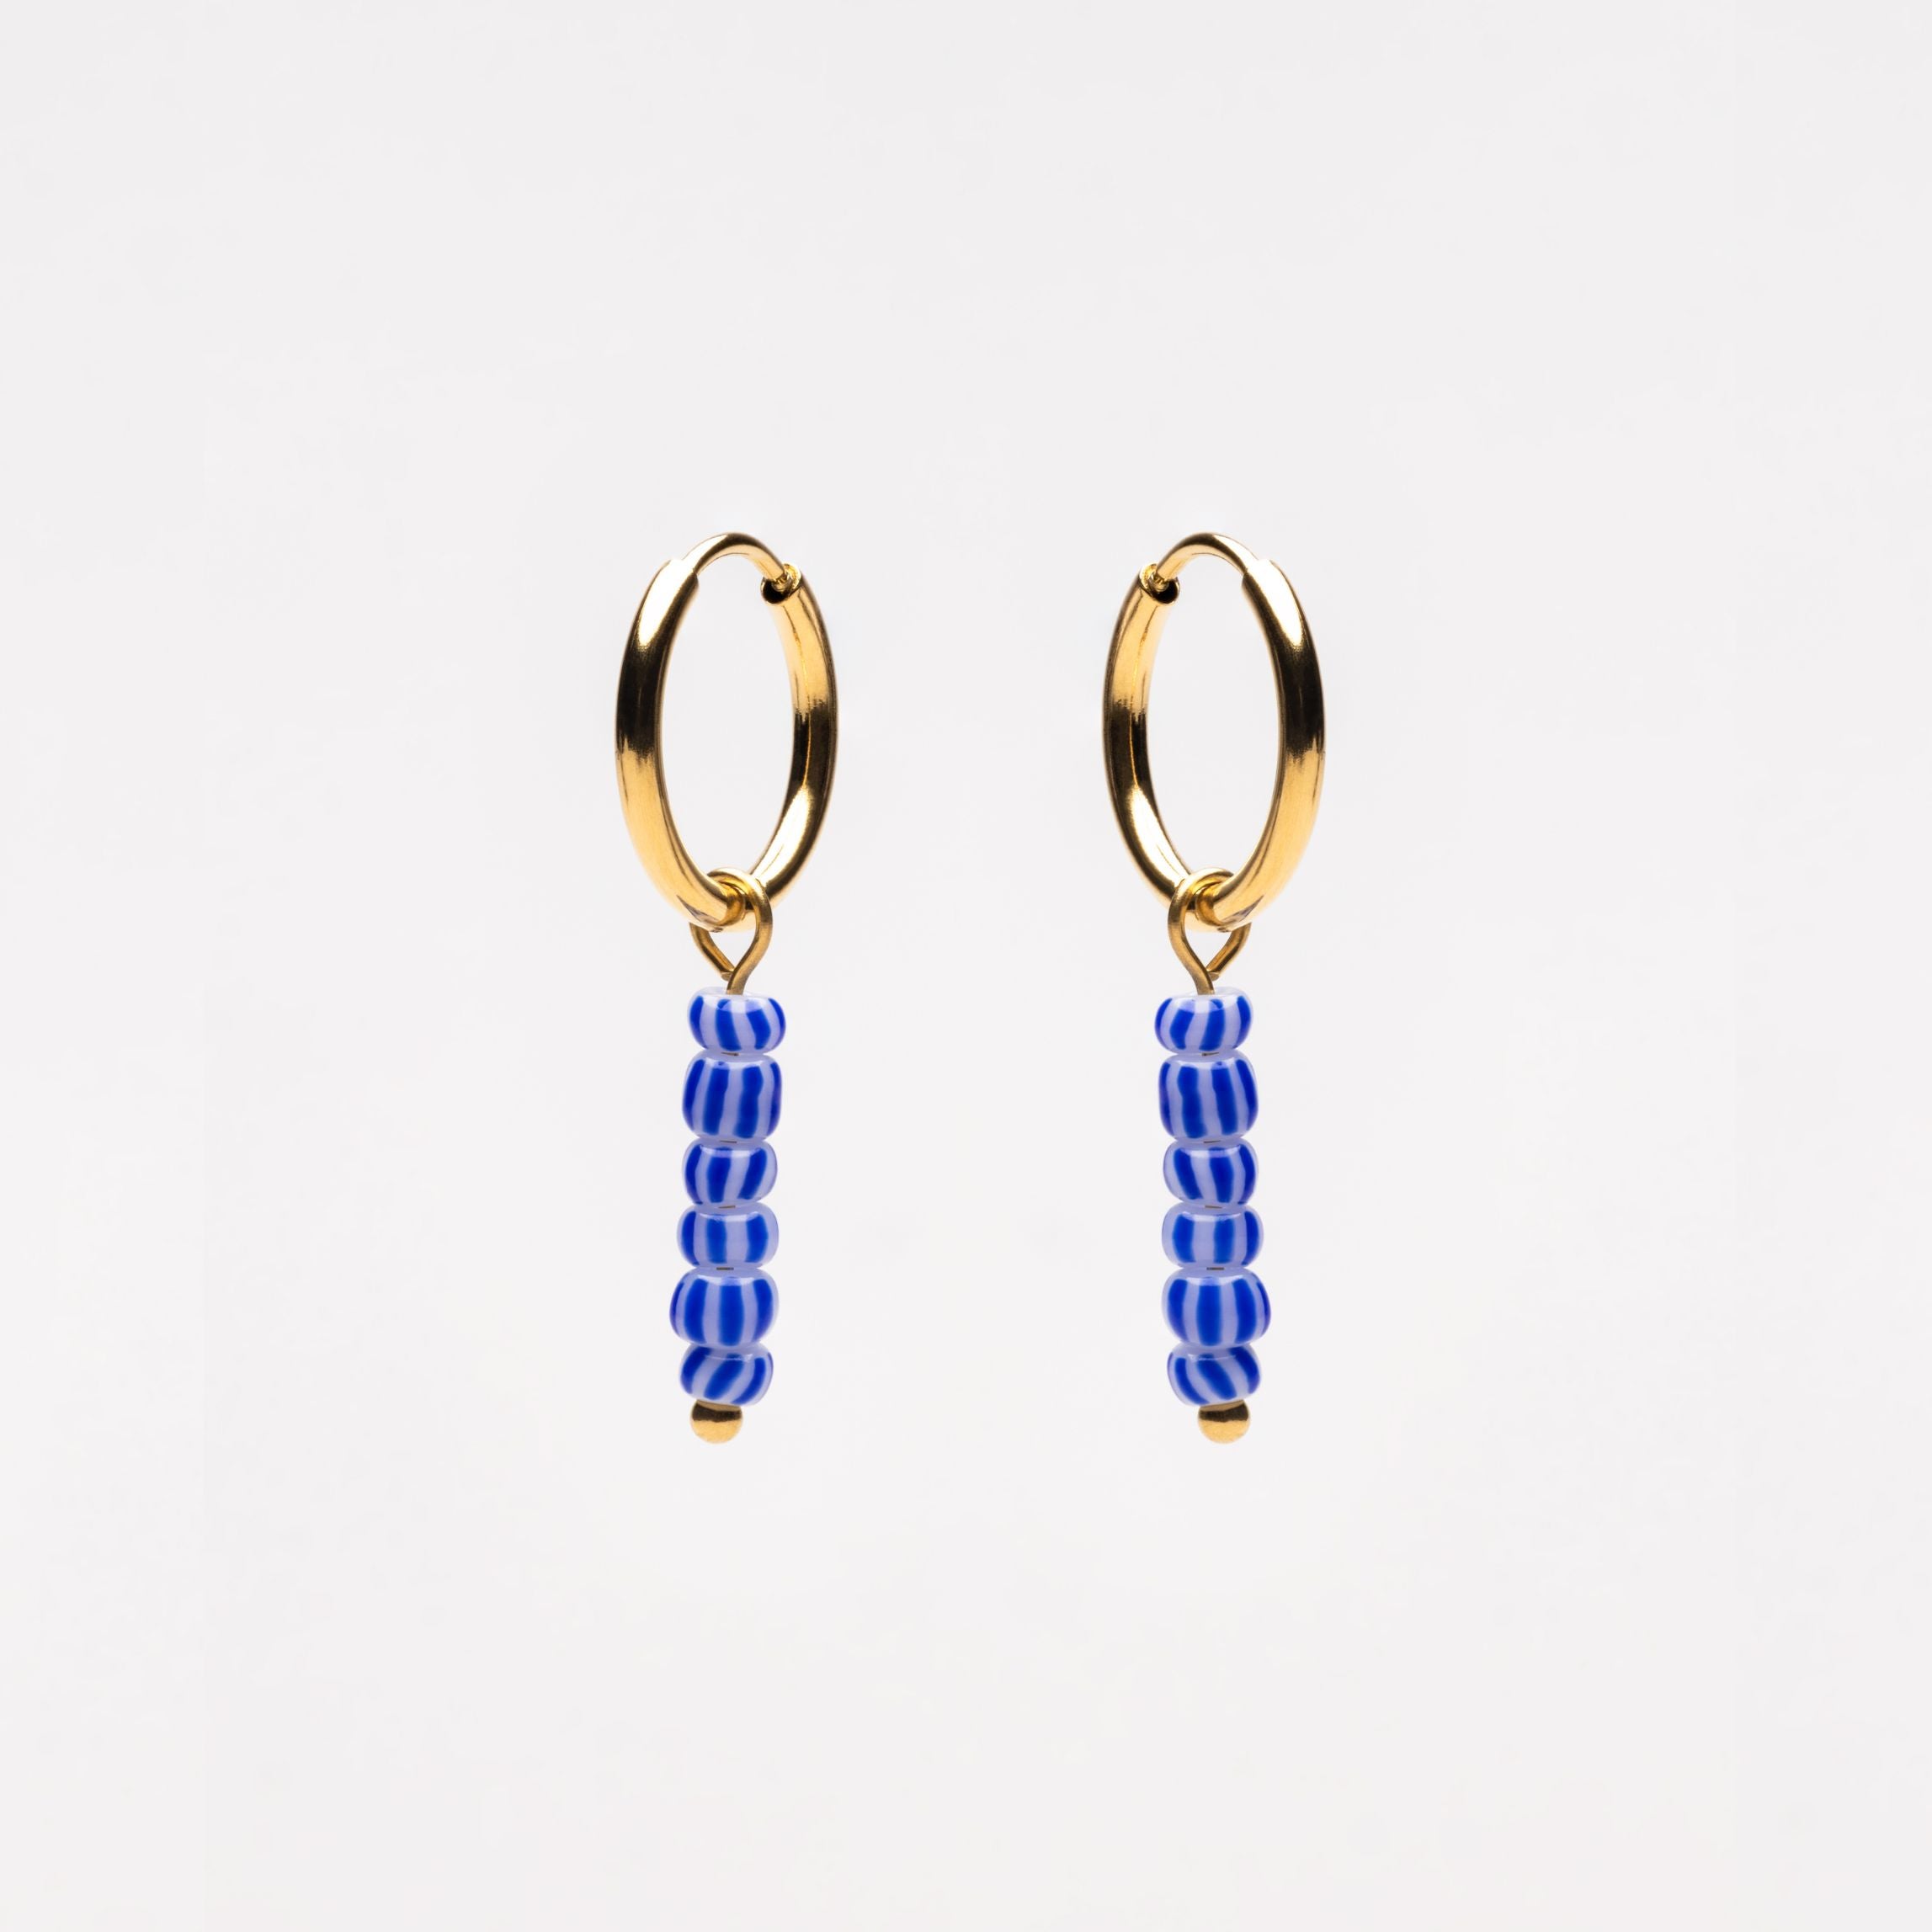 Blue and white earrings